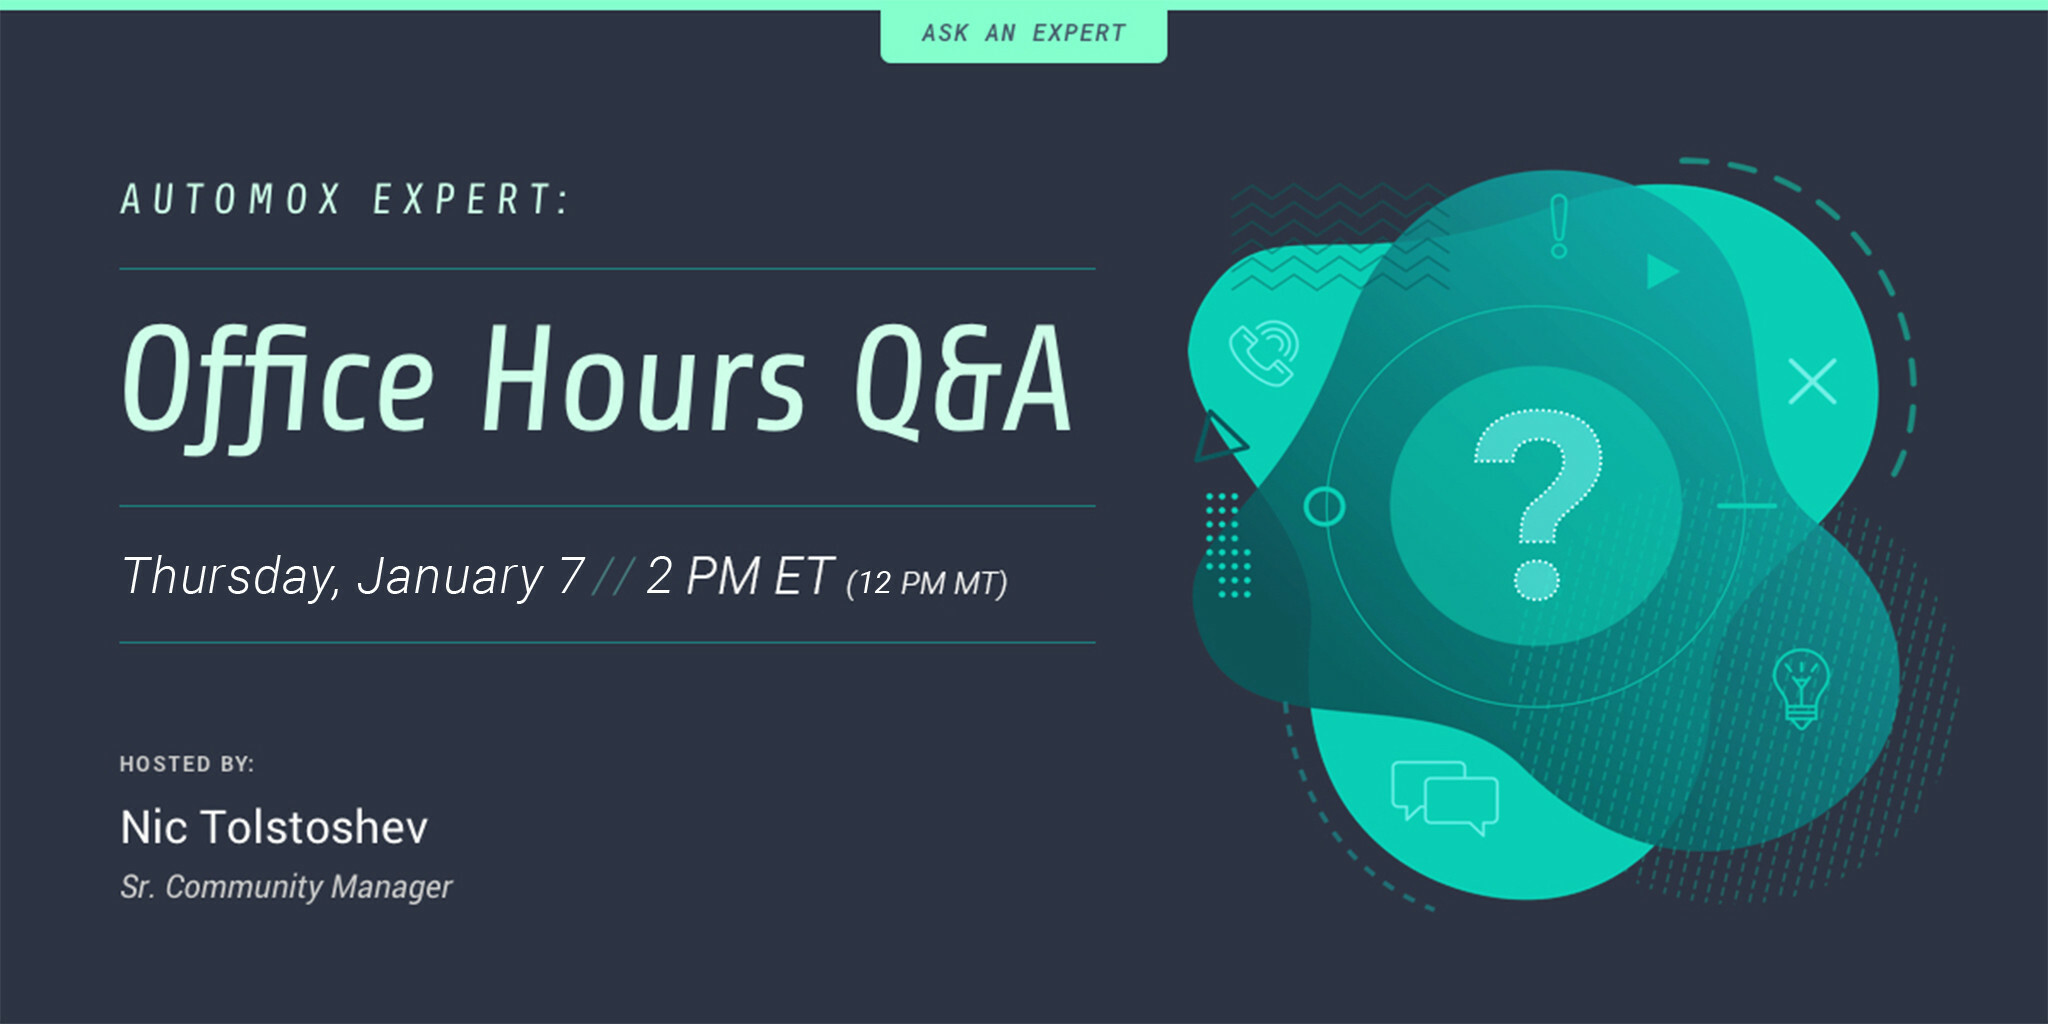 Upcoming Office Hours Q&A Session on January 7th!